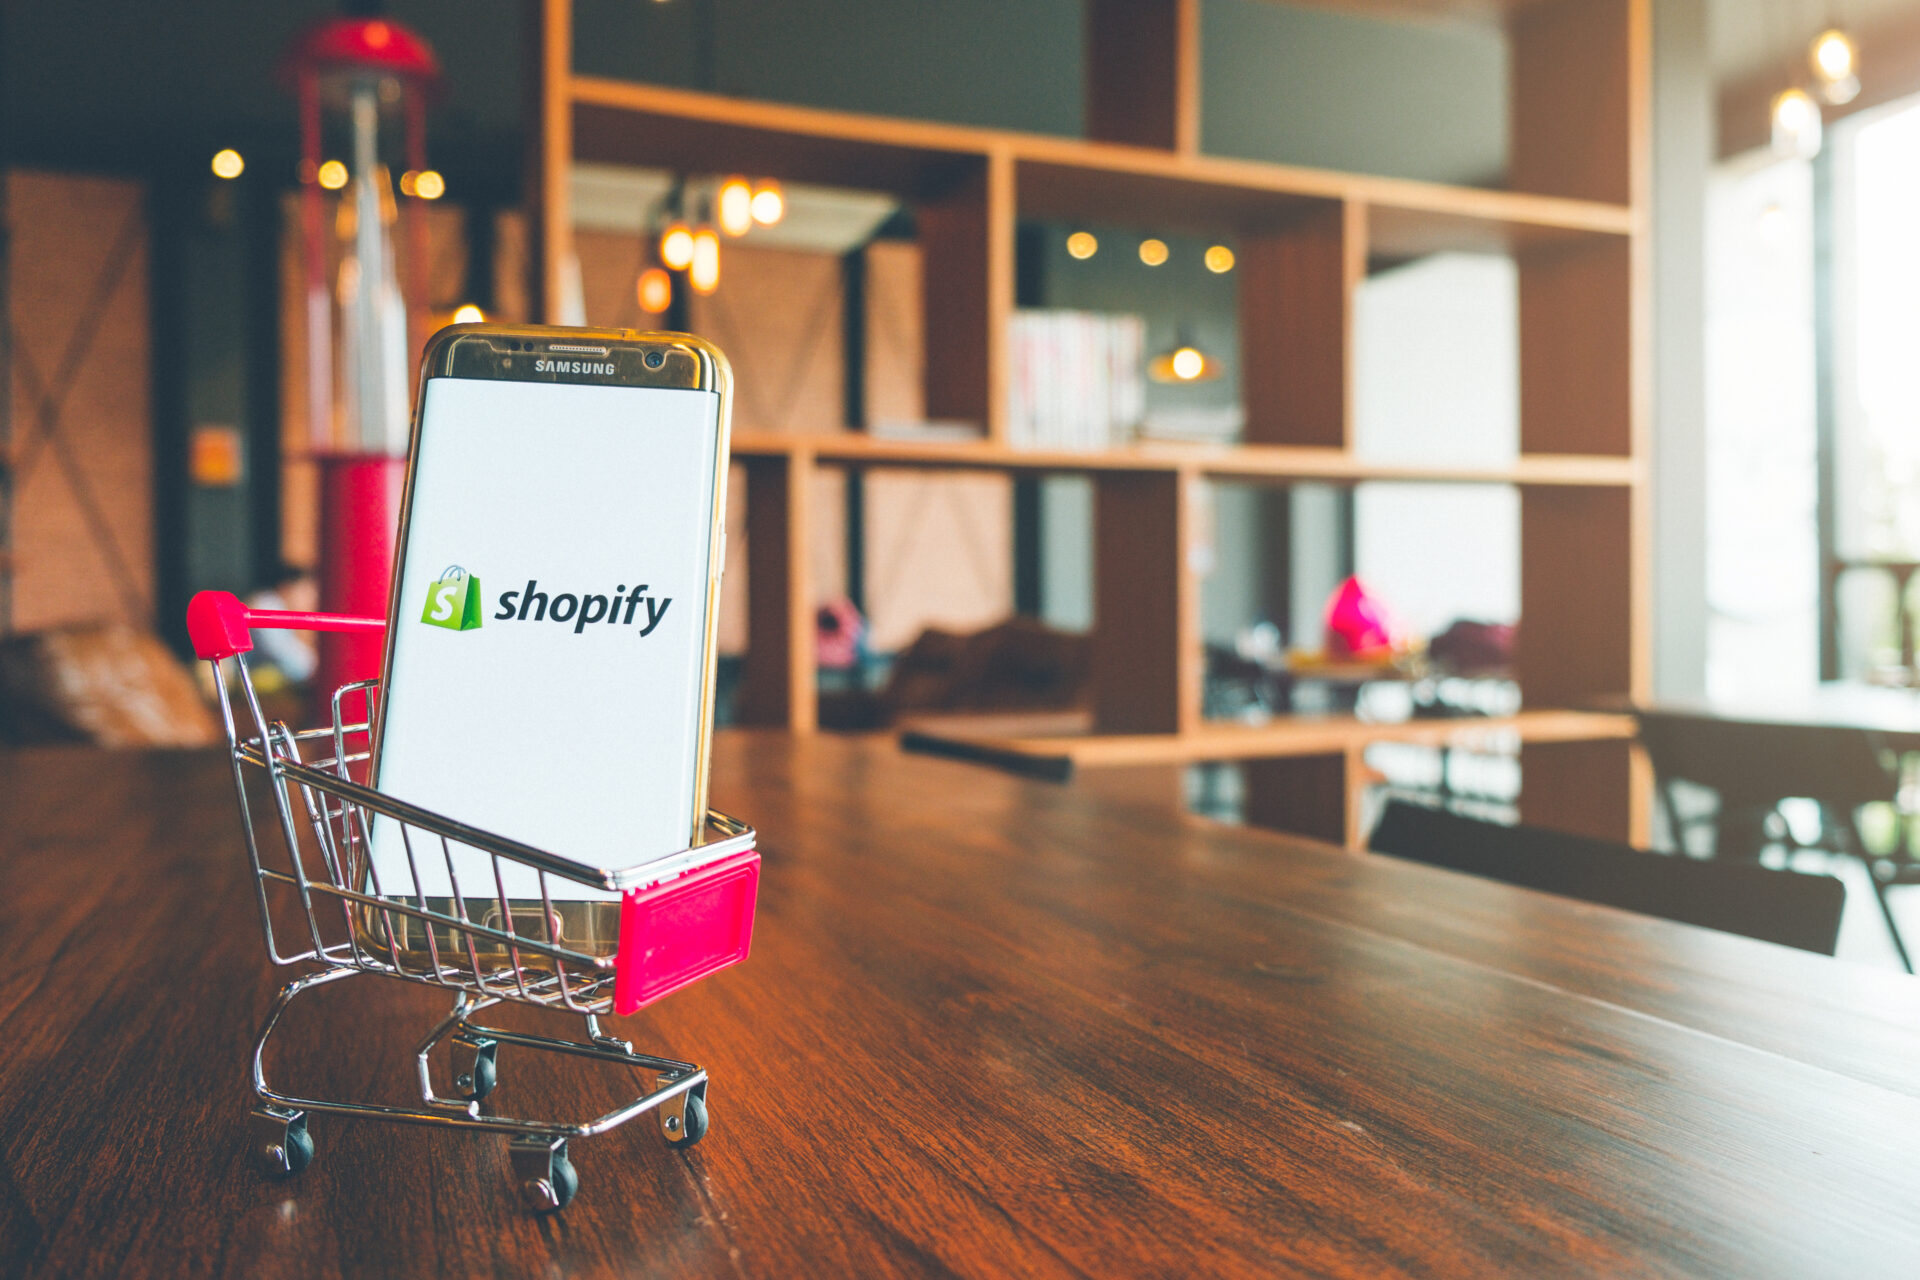 Frequently Asked Questions about Shopify